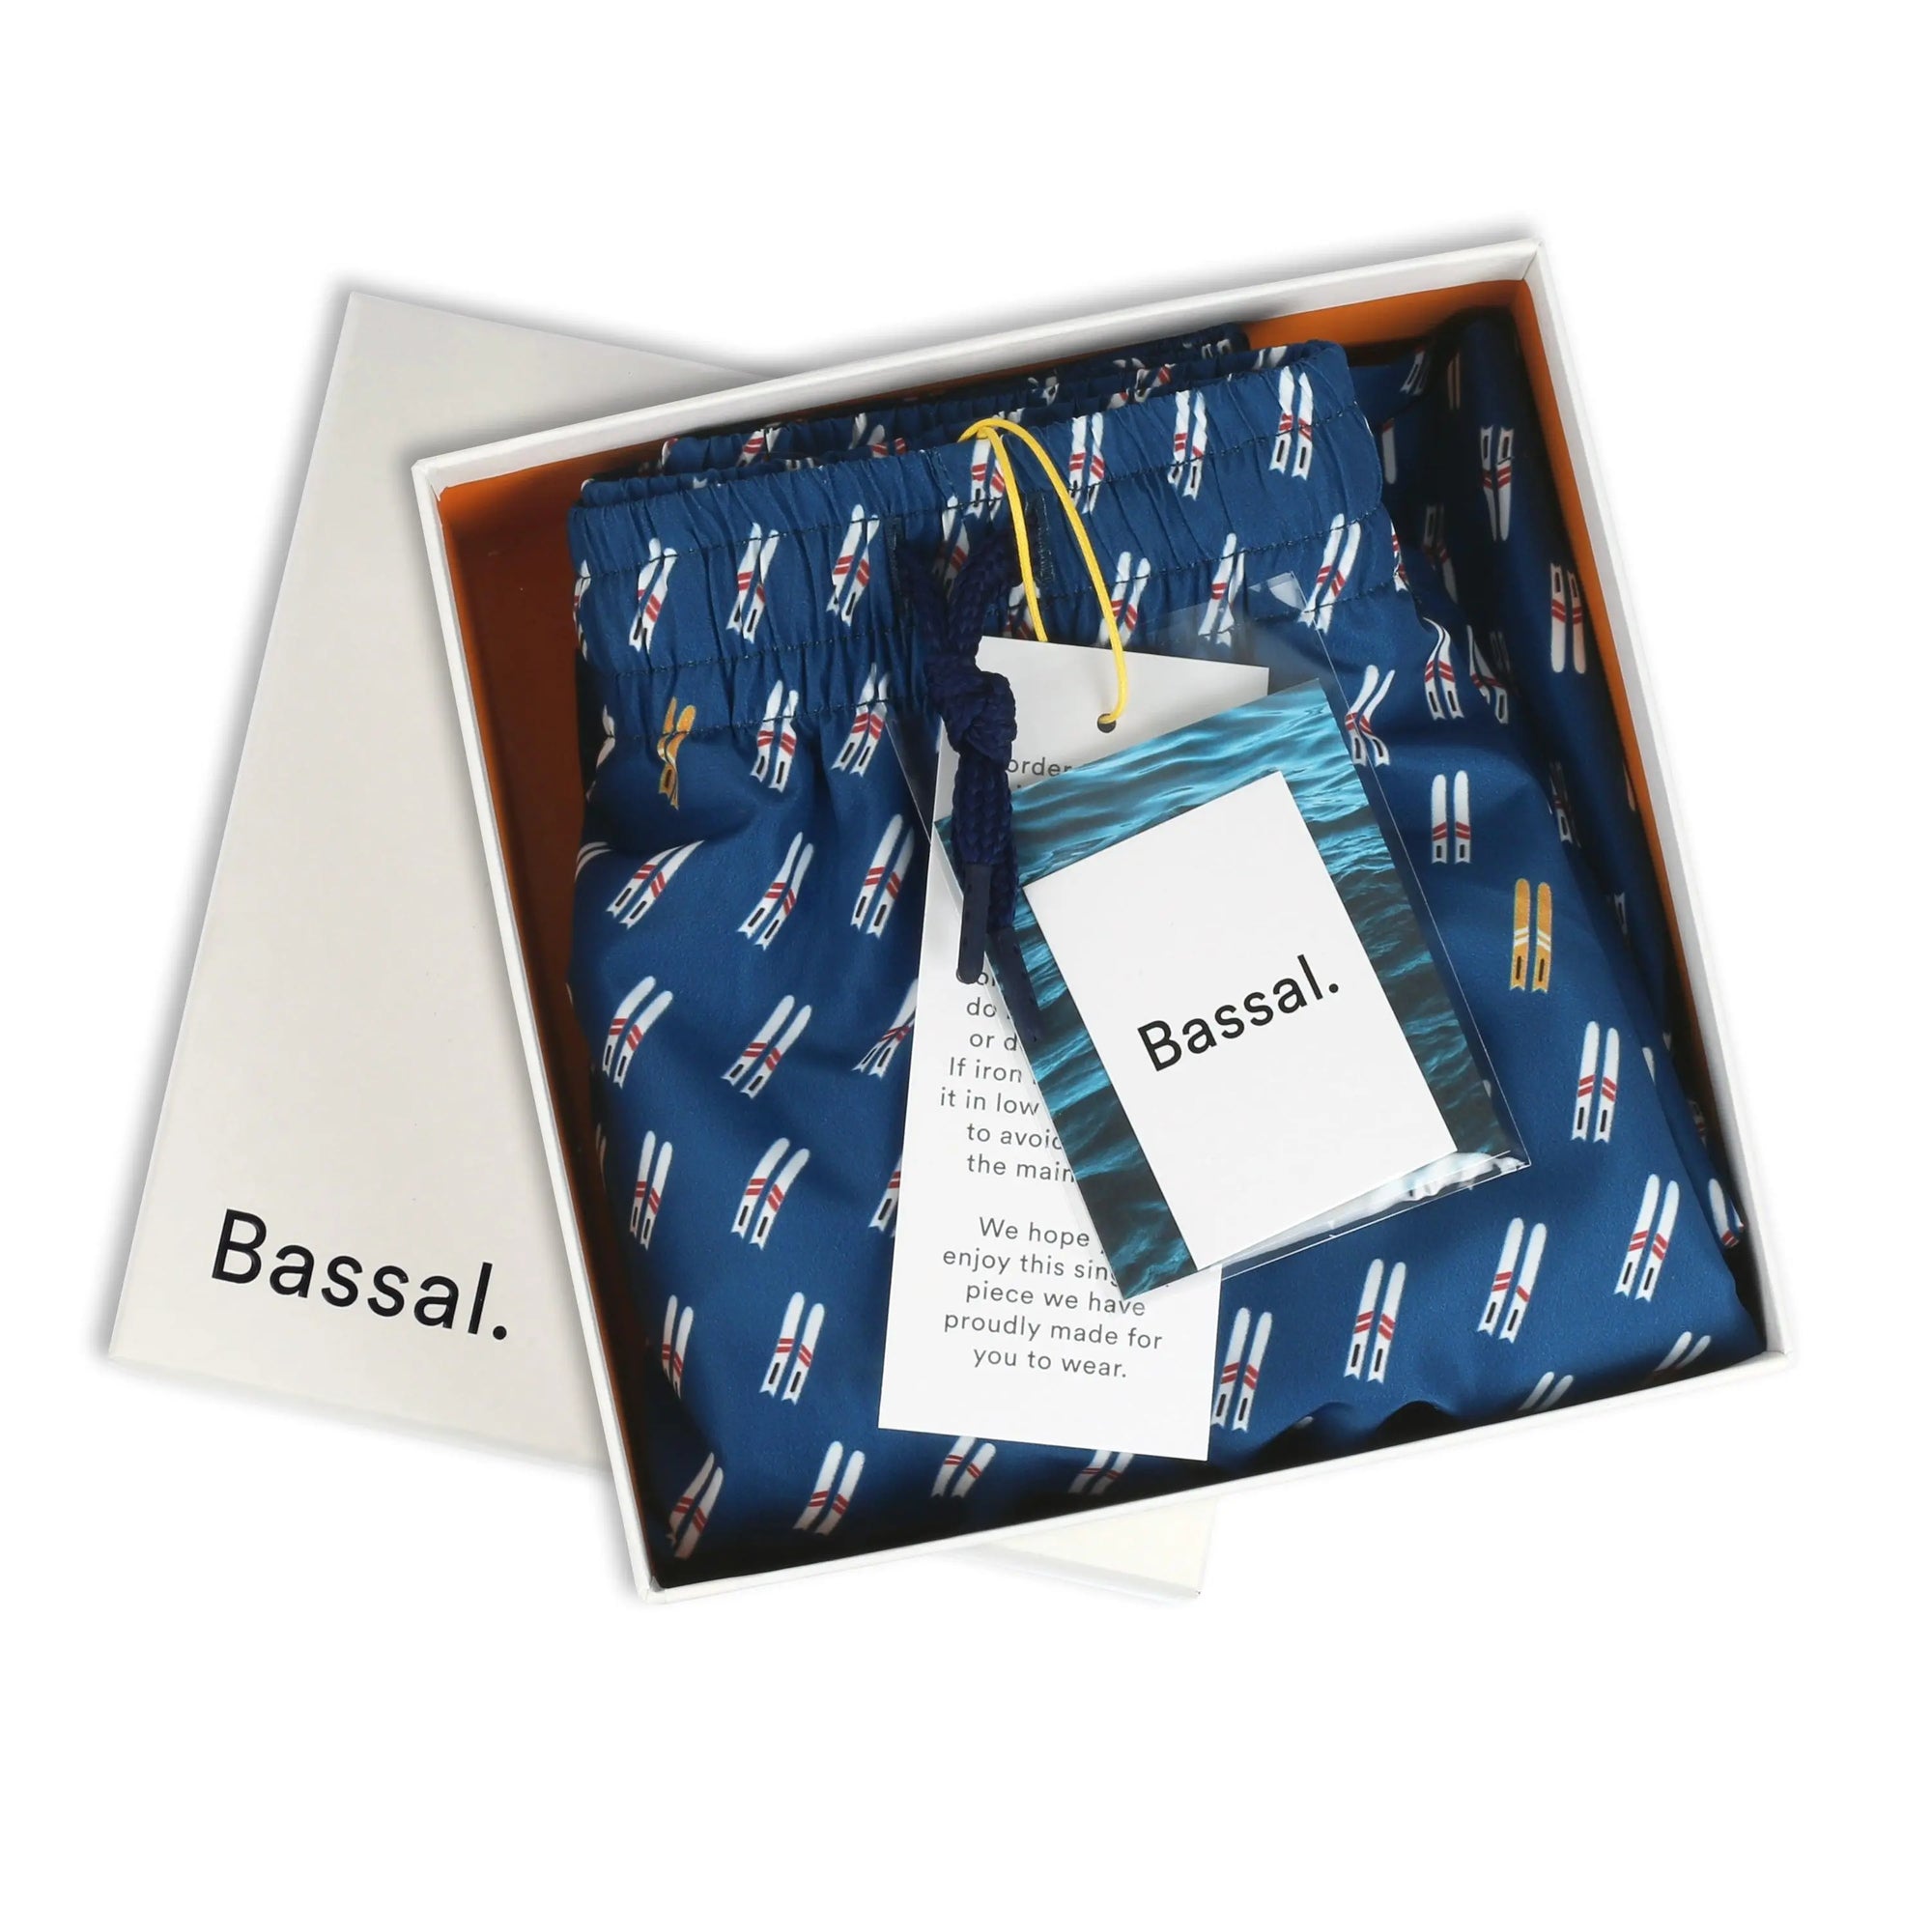 A box of Ski Swimwear men's swim trunks with a blue base color and a pattern of small surfboards. The open box, branded with the name "Bassal," hints at the quality you'd expect from Barcelona's premier store. A tag and an additional label attached to the trunks are visible.